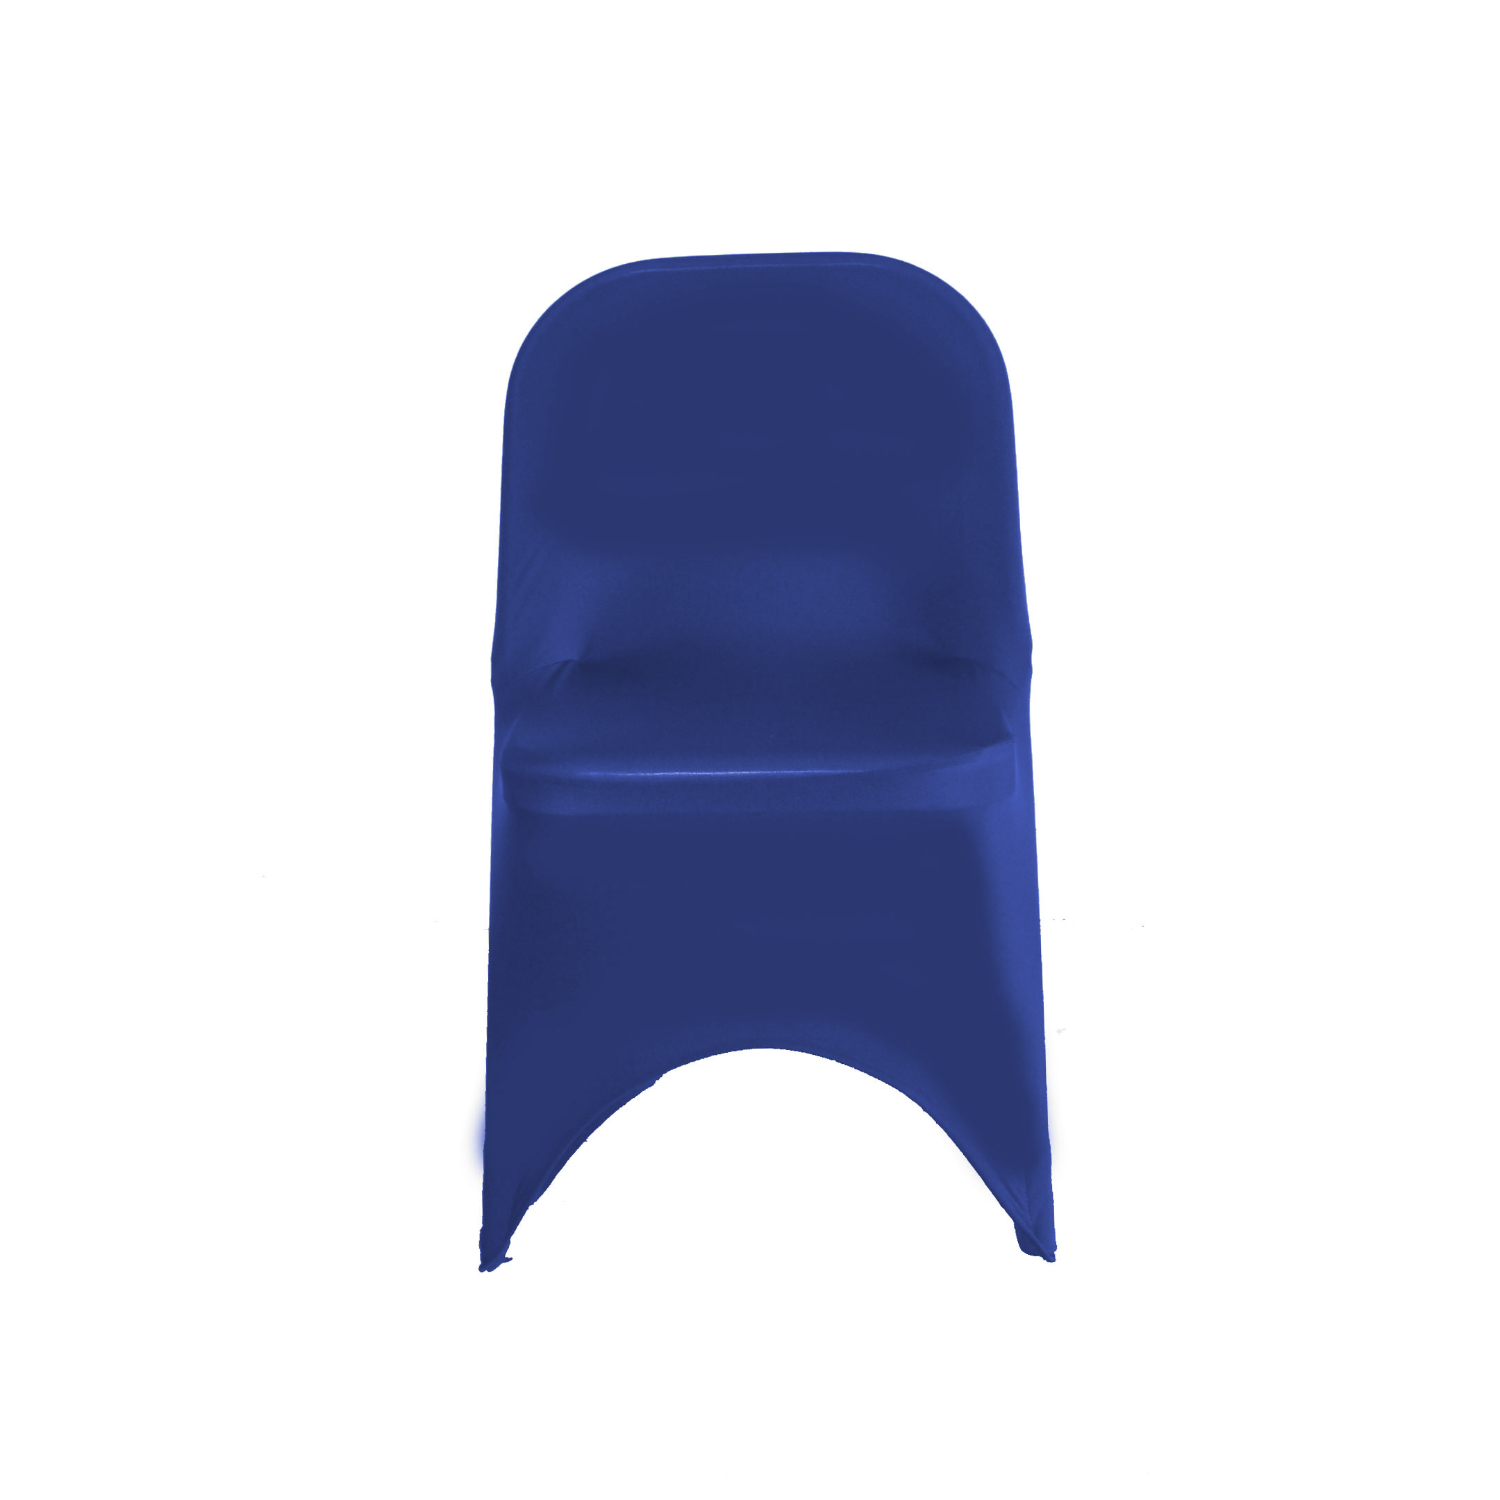 Your Chair Covers - Spandex Folding Chair Cover Royal Blue for Wedding, Party, Birthday, Patio, etc. - image 3 of 3